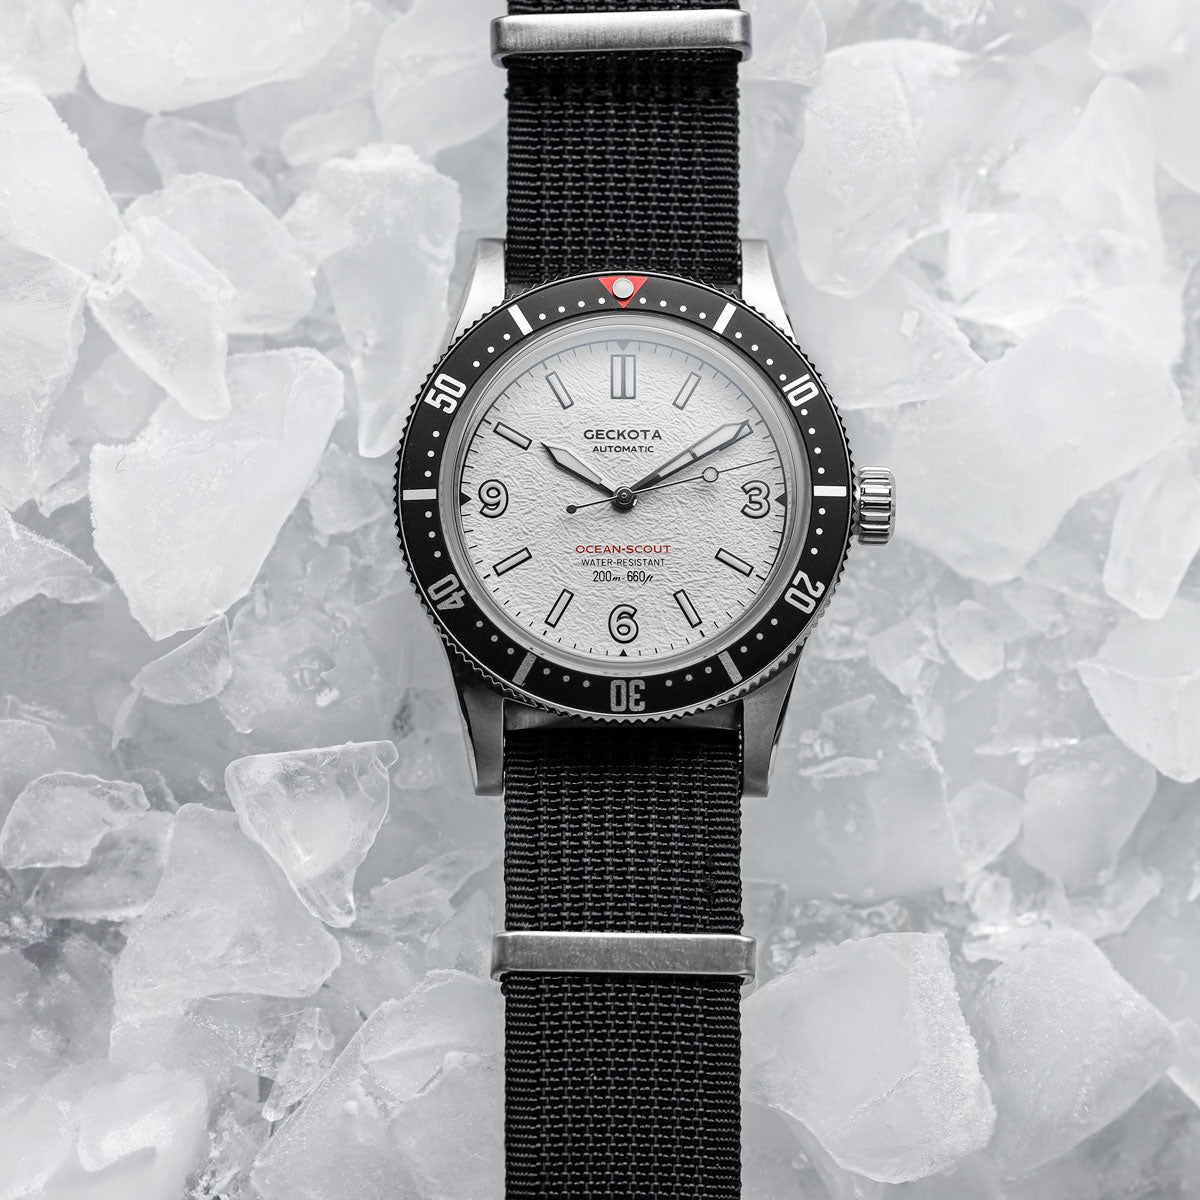 Geckota Ocean-Scout Dive Watch - Ice White - Berwick Stainless Steel Strap - additional image 2